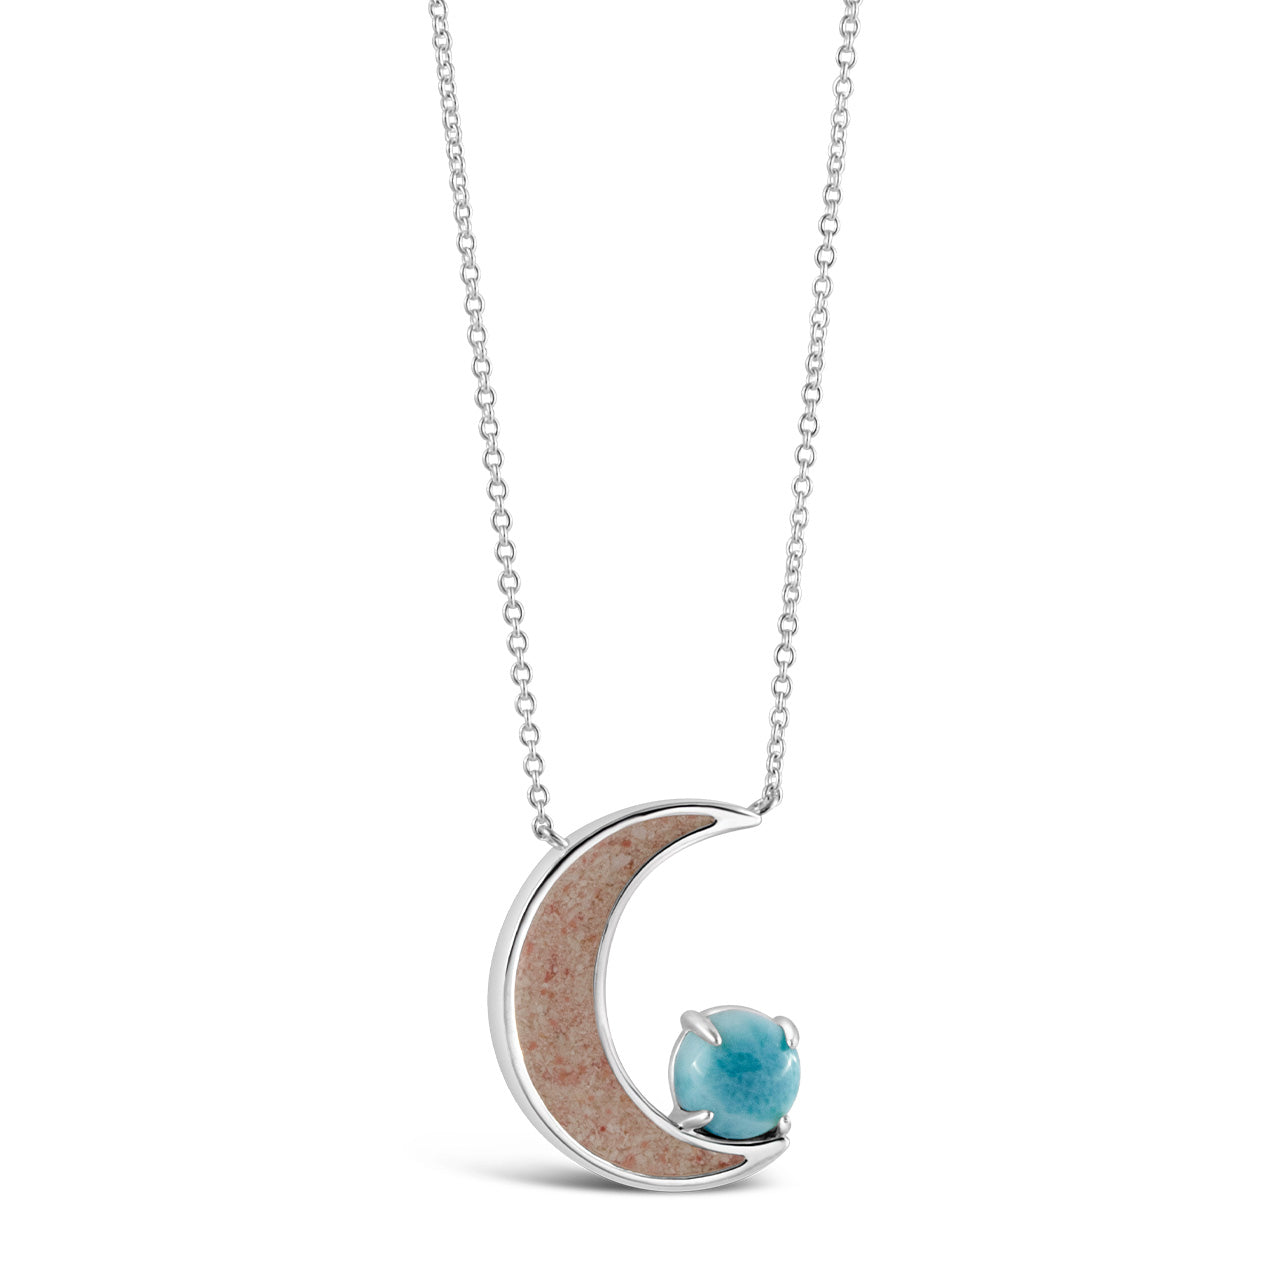 Dune Jewelry Dune Jewelry - Blue Moon Stationary Necklace - Larimar & LBI Sand/Shells - S/S available at The Good Life Boutique